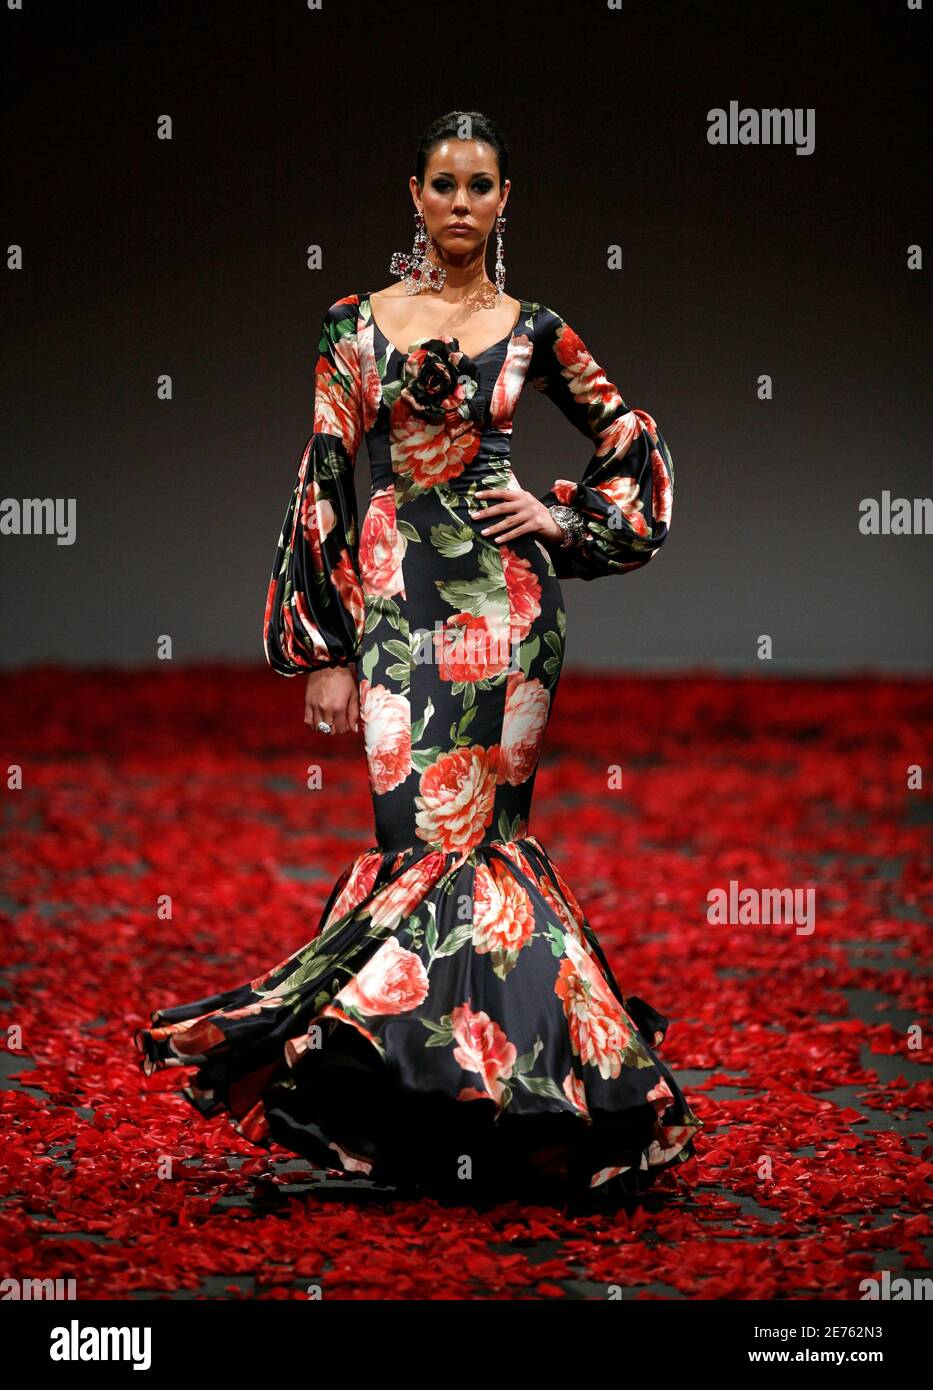 A model presents a creation from Vicky Martin Berrocal during the  International Flamenco Fashion Show in Seville January 31, 2008. The show  will run until February 3. REUTERS/Marcelo del Pozo (SPAIN Stock